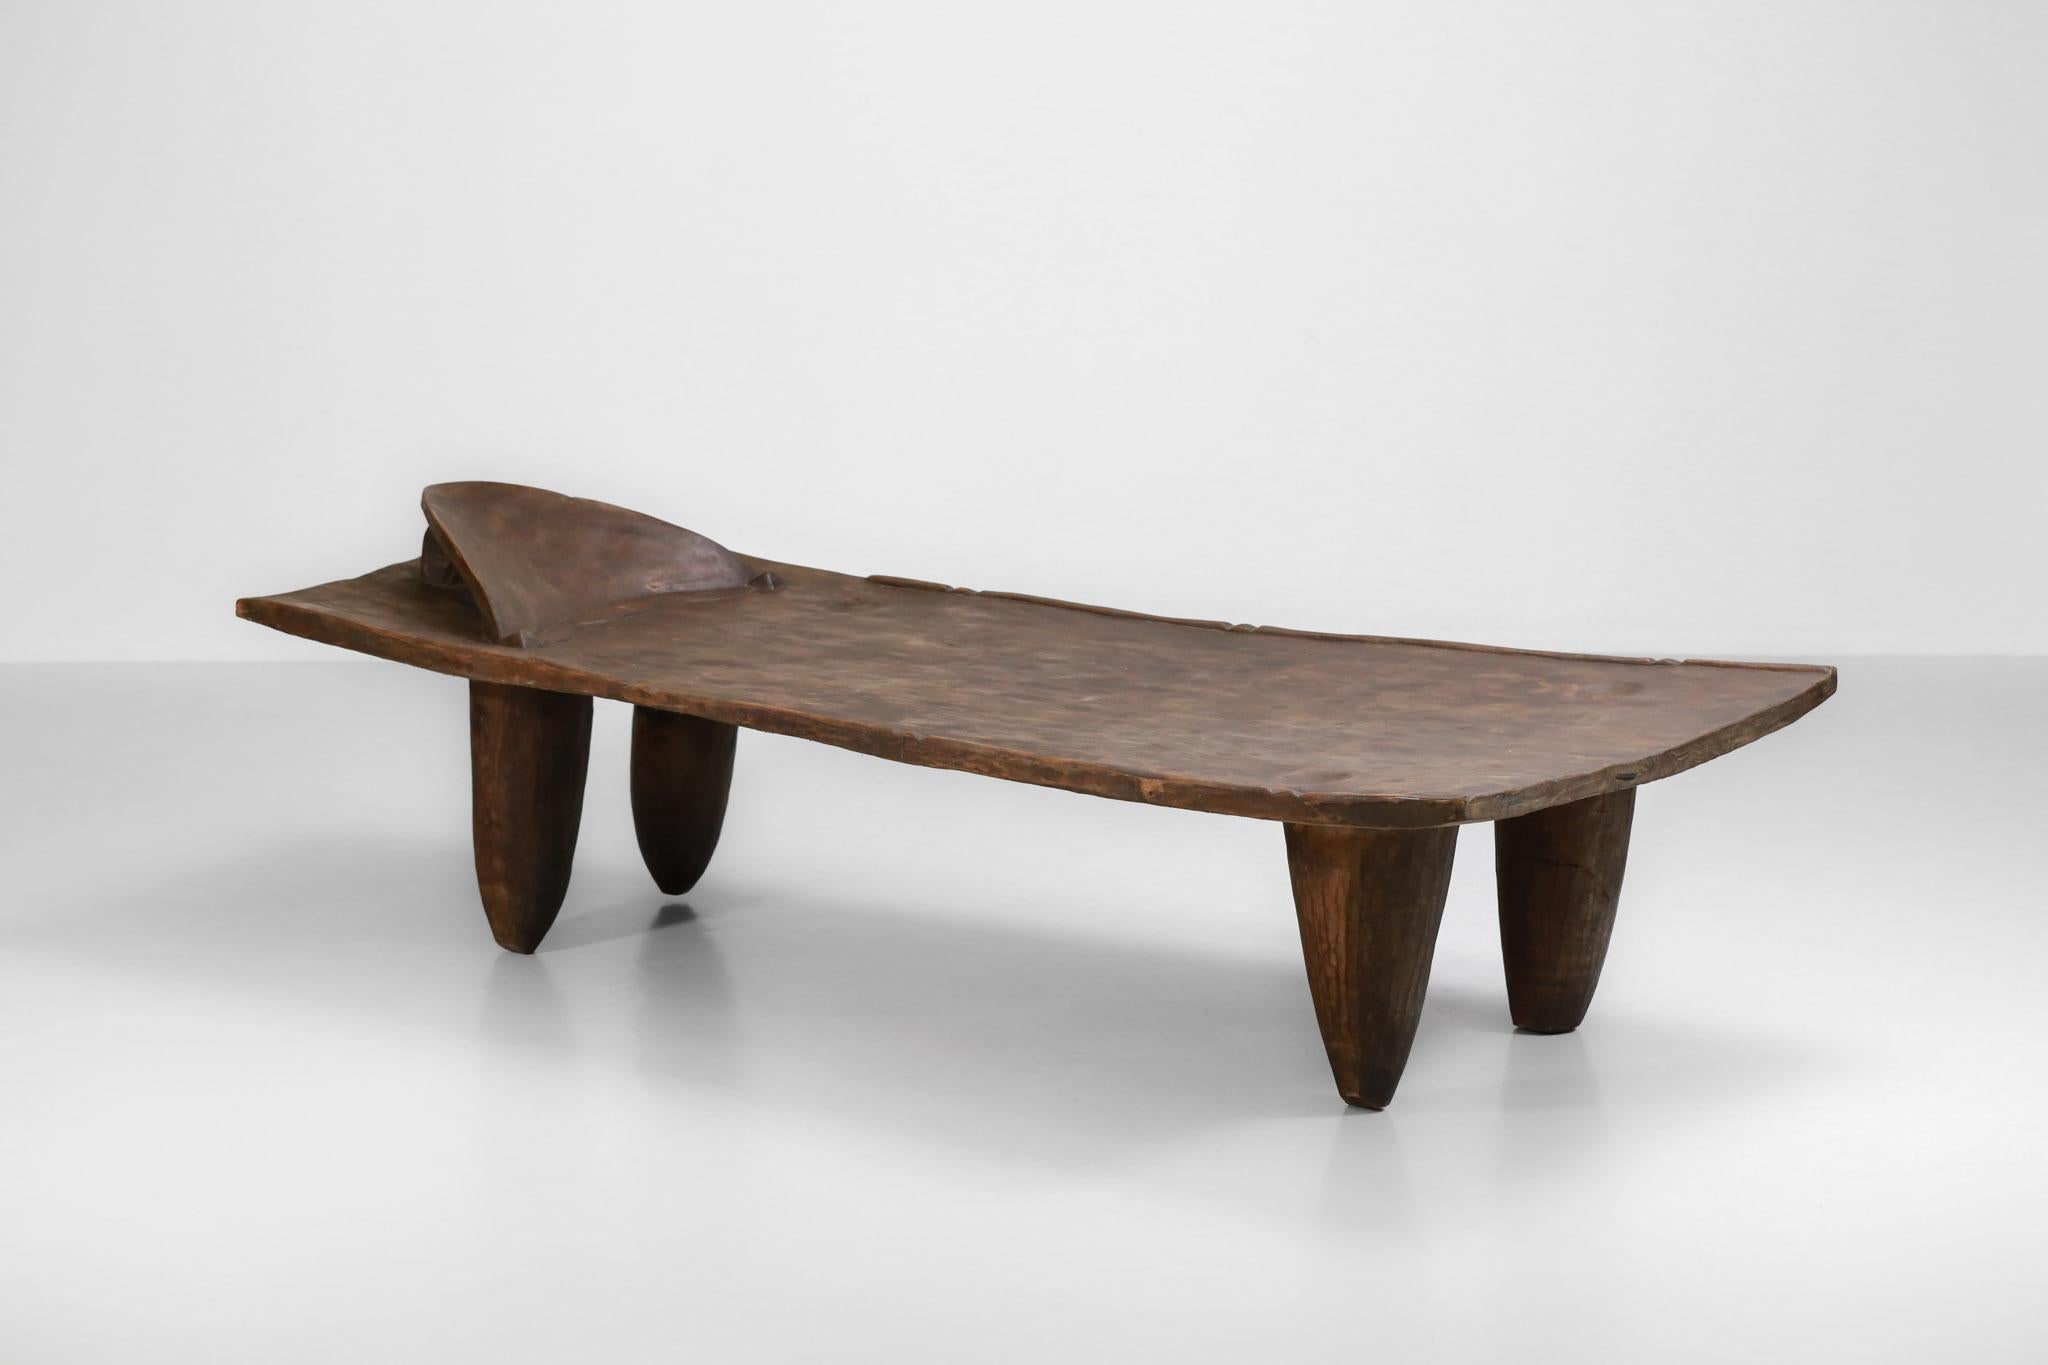 Large African resting bed made of solid wood from Benin which can also be used as a coffee table. 
Entirely hand carved in a single piece of wood.